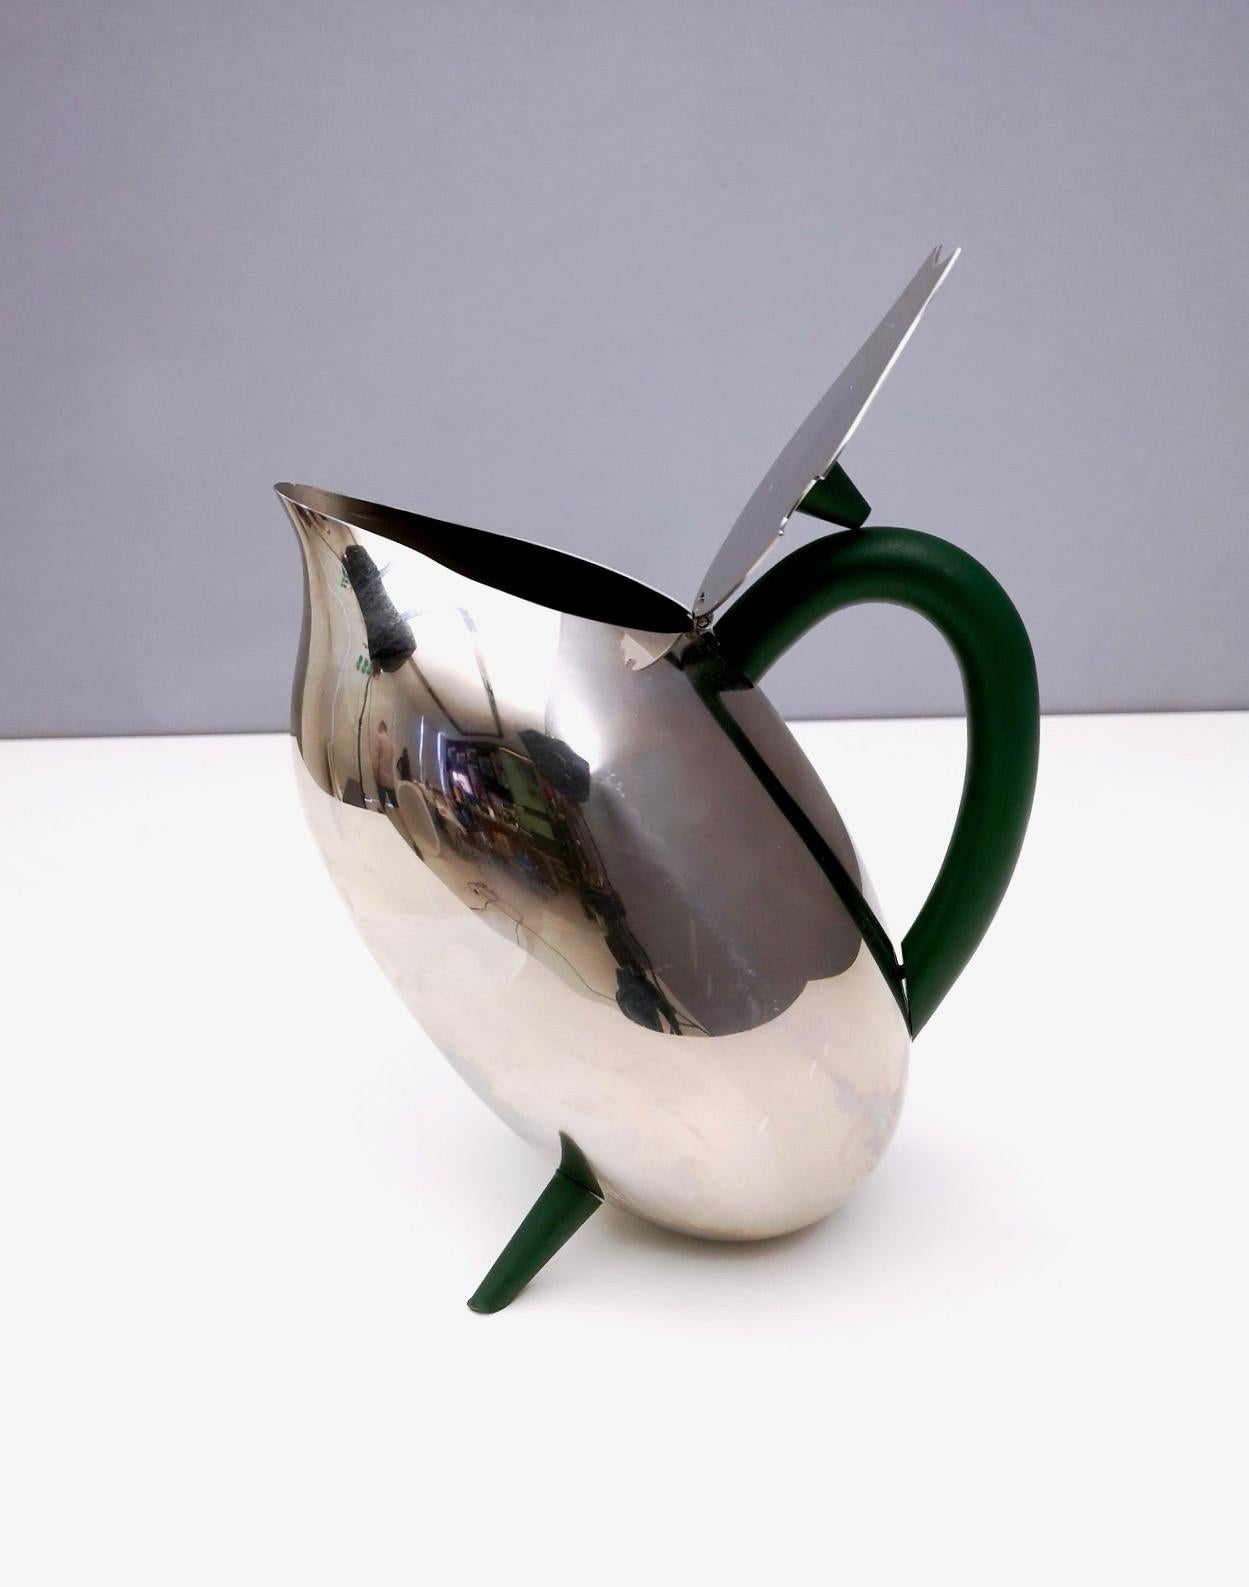 This tea kettle is made in polished stainless steel and has green polycarbonate handle, knob and feet.
Only 3,000 pieces were manufactured and it is now out of production.
It is a vintage item, therefore it might show slight traces of use, but it